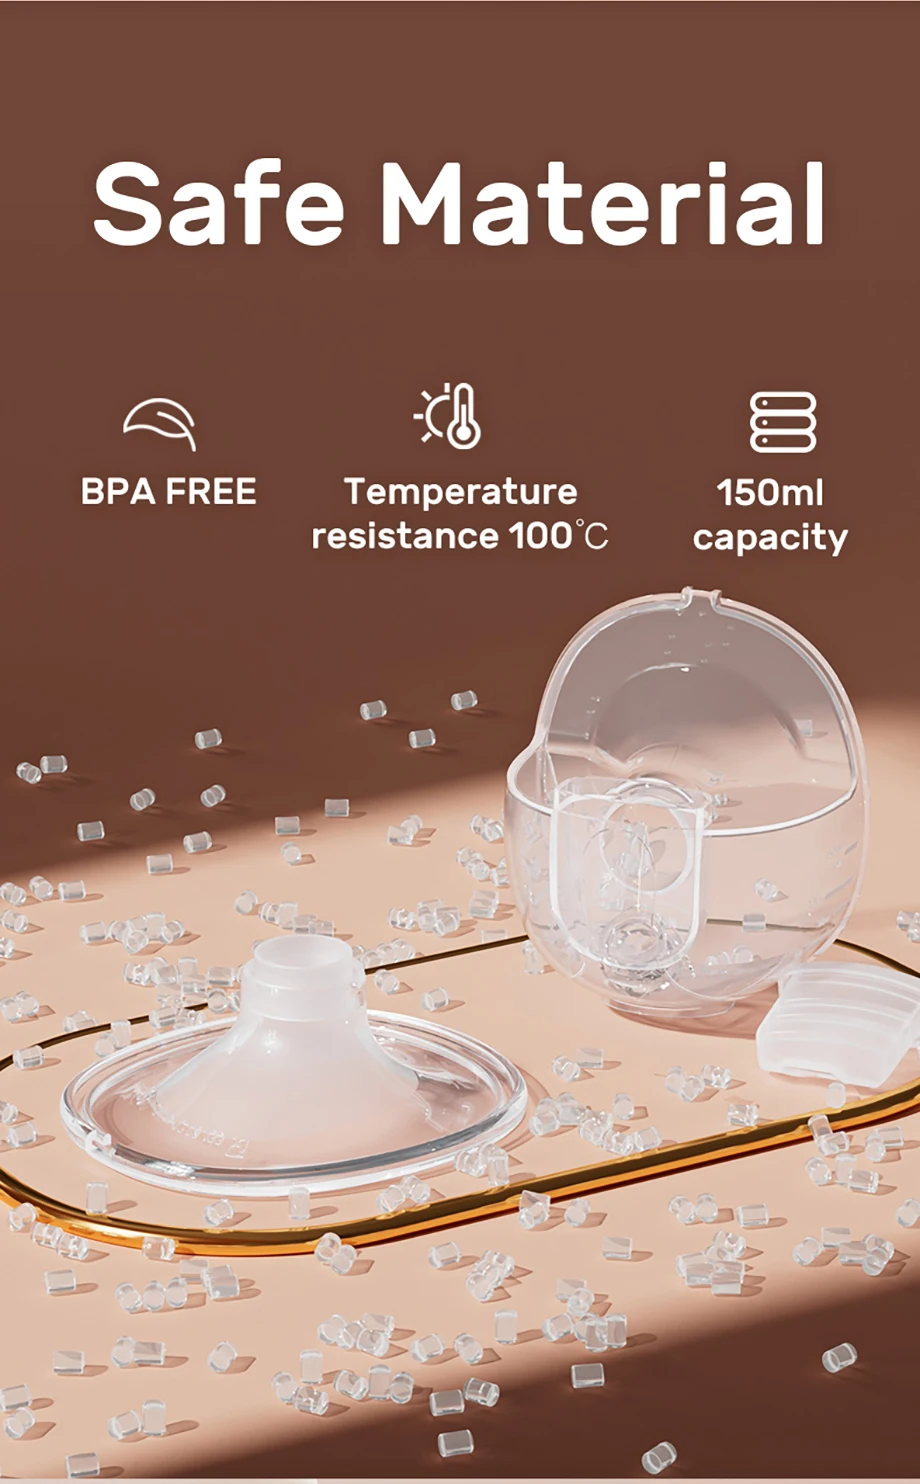 Sa8a8e51fe91546f8897df9b255308c26I NCVI Wearable Breast Pump, Hands-Free Breast Pump with 4 Modes & 9 Levels, Portable Breast Pump, Low Noise & Discreet, 24mm